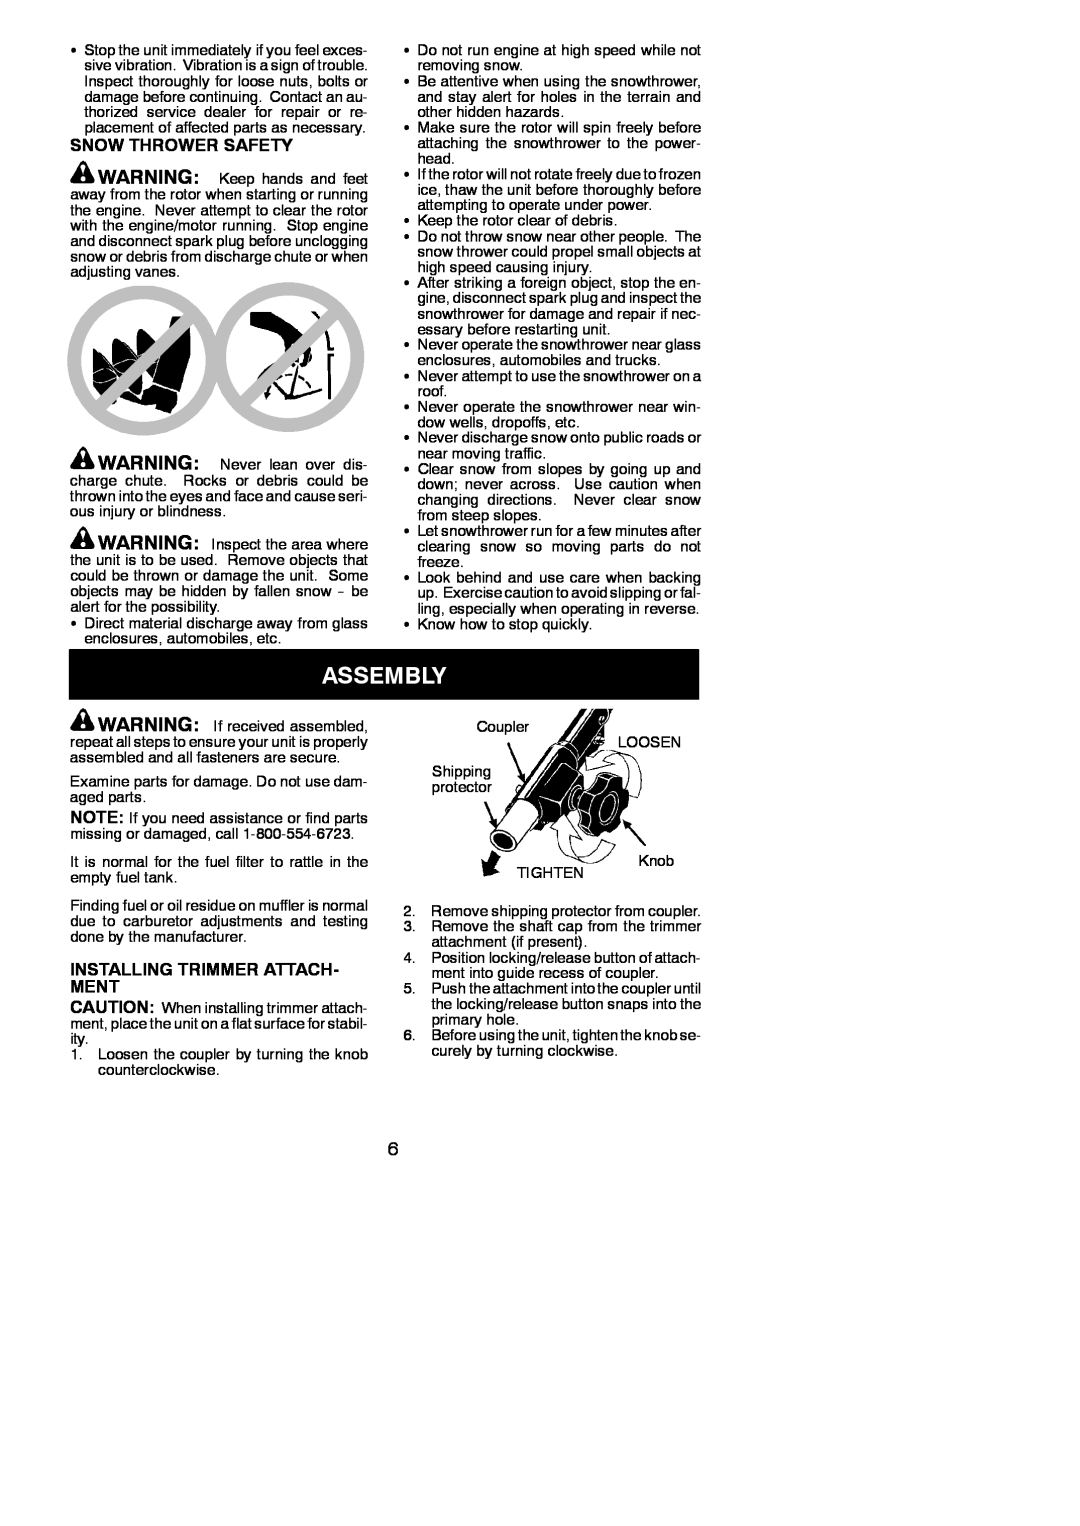 Poulan PP025 instruction manual Assembly, Snow Thrower Safety, Installing Trimmer Attach- Ment 